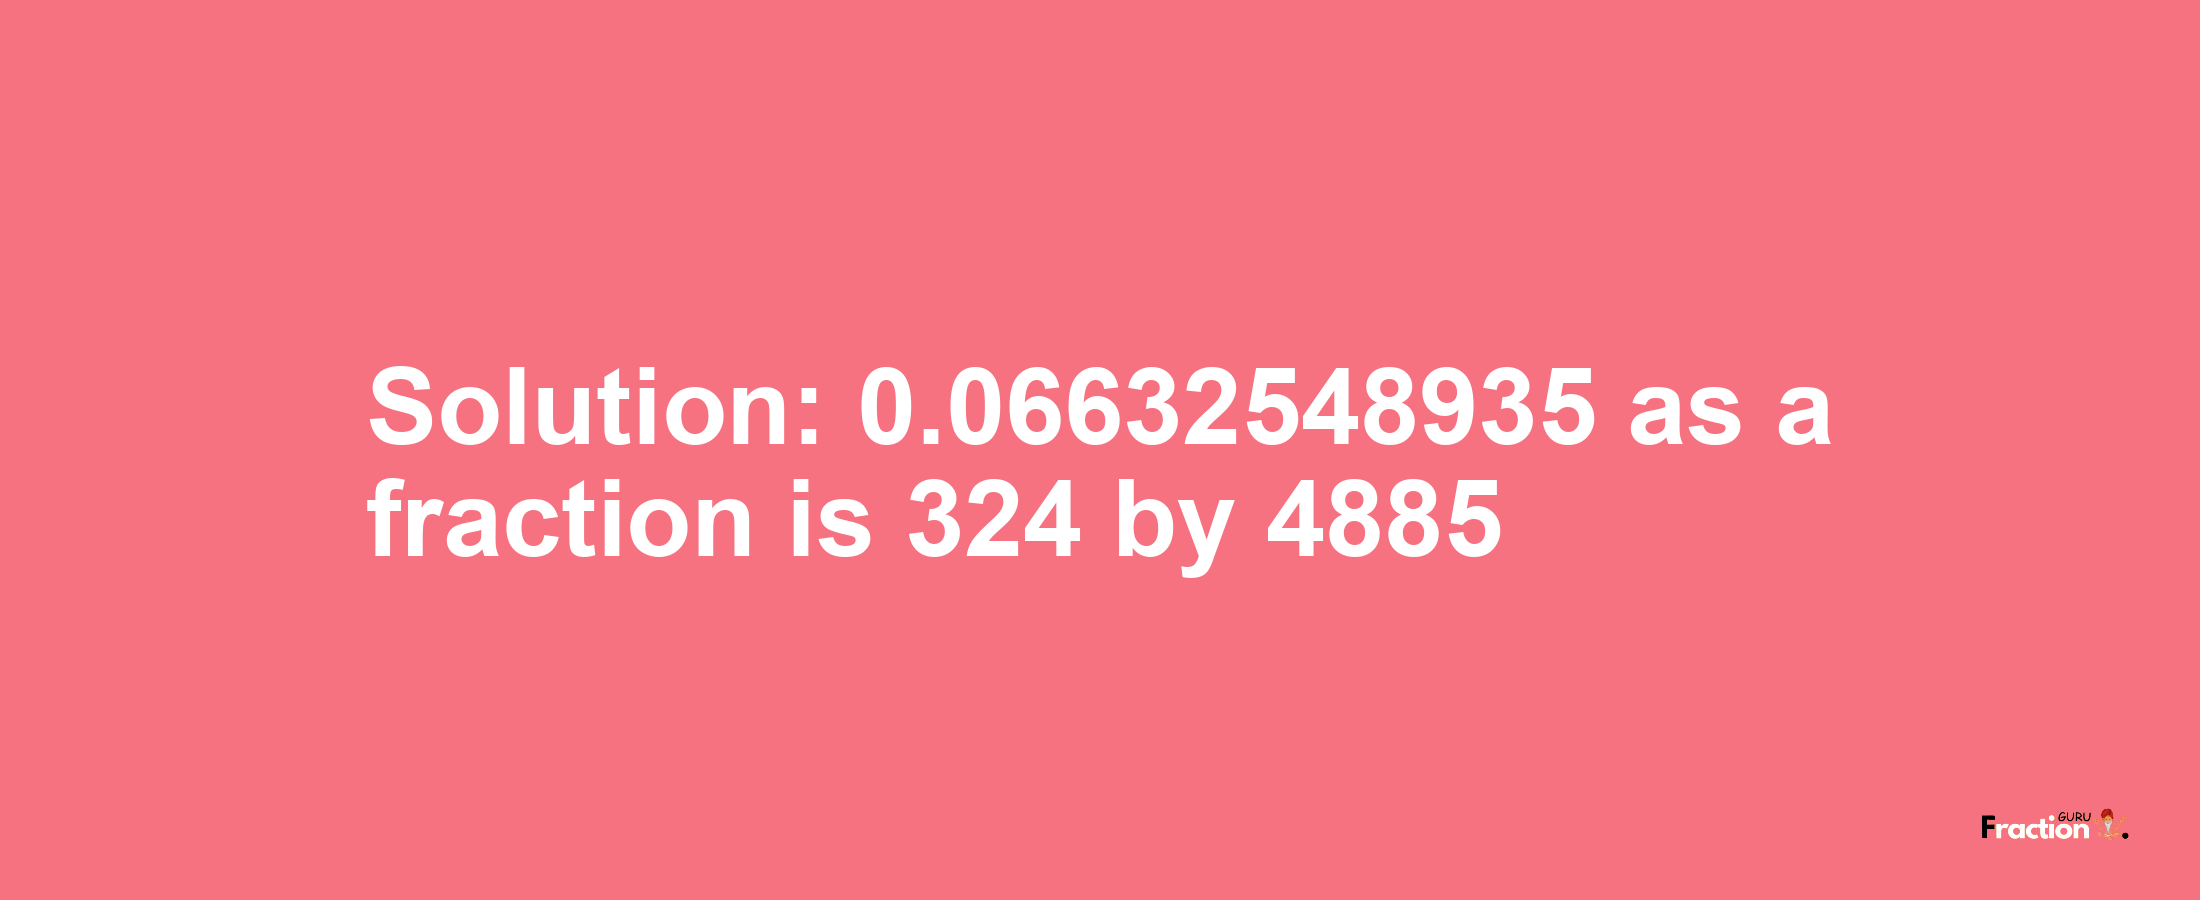 Solution:0.06632548935 as a fraction is 324/4885